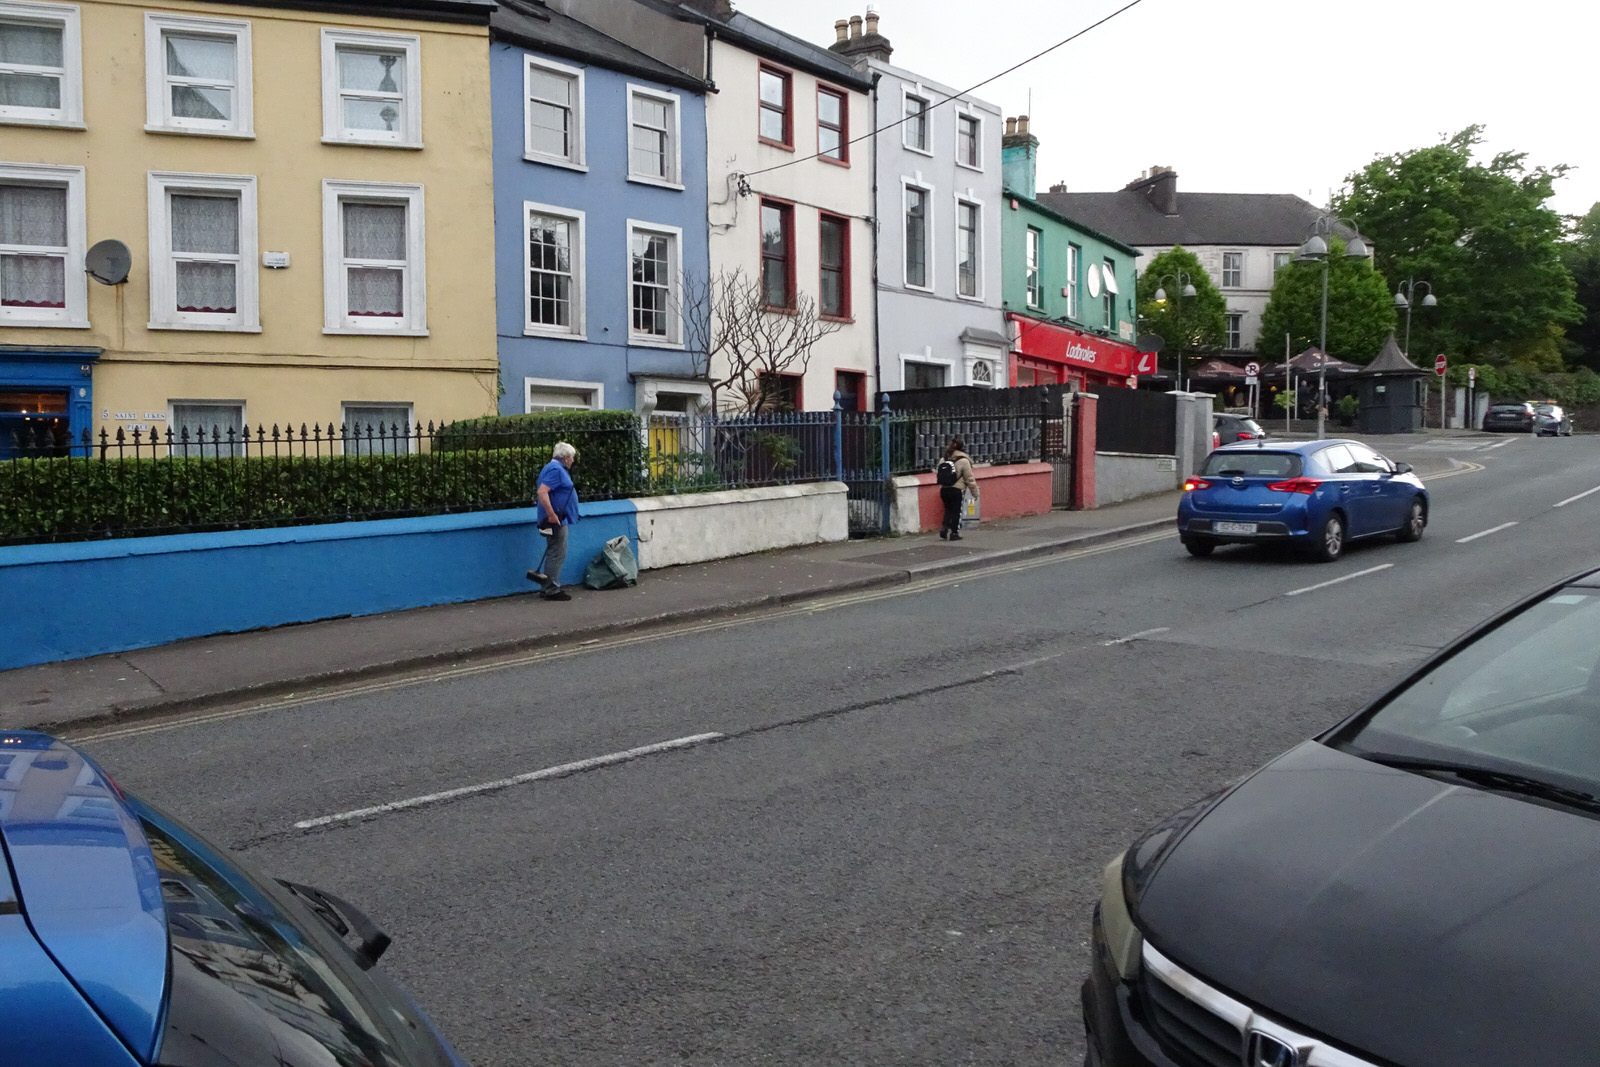 A WALK ALONG SUMMERHILL NORTH [IN CORK EVERYWHERE IS UPHILL OR DOWNHILL]-225840-1